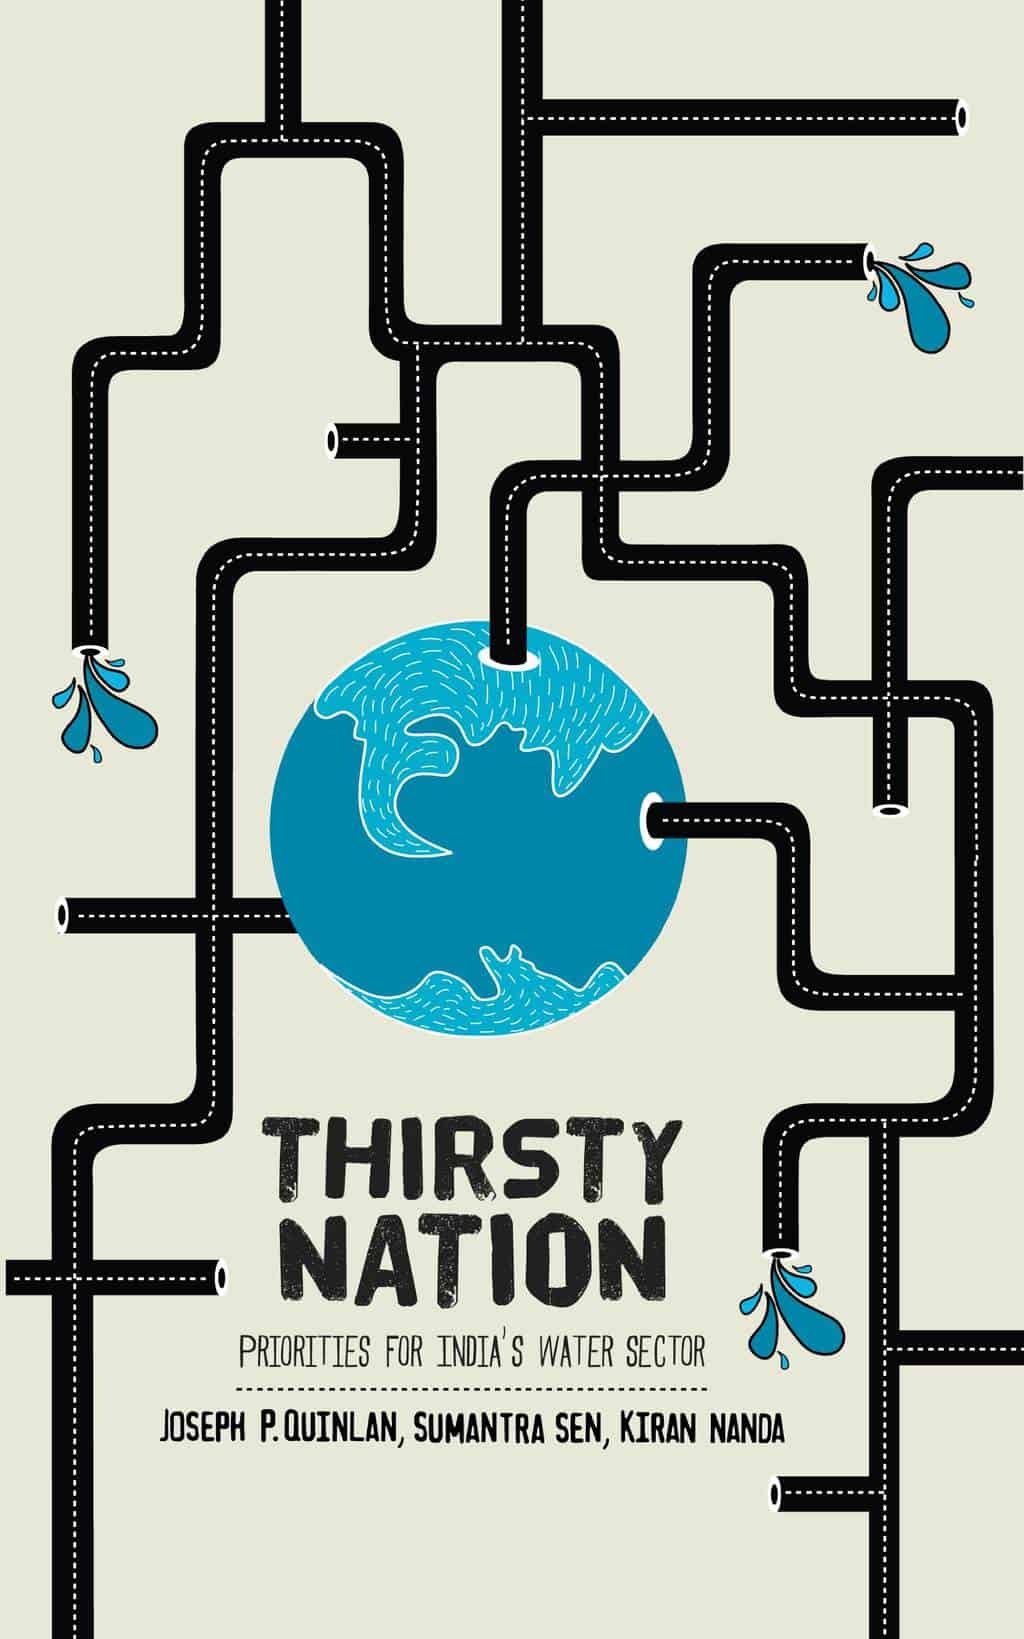 Thirsty Nation: Priorities for India's Water Sector